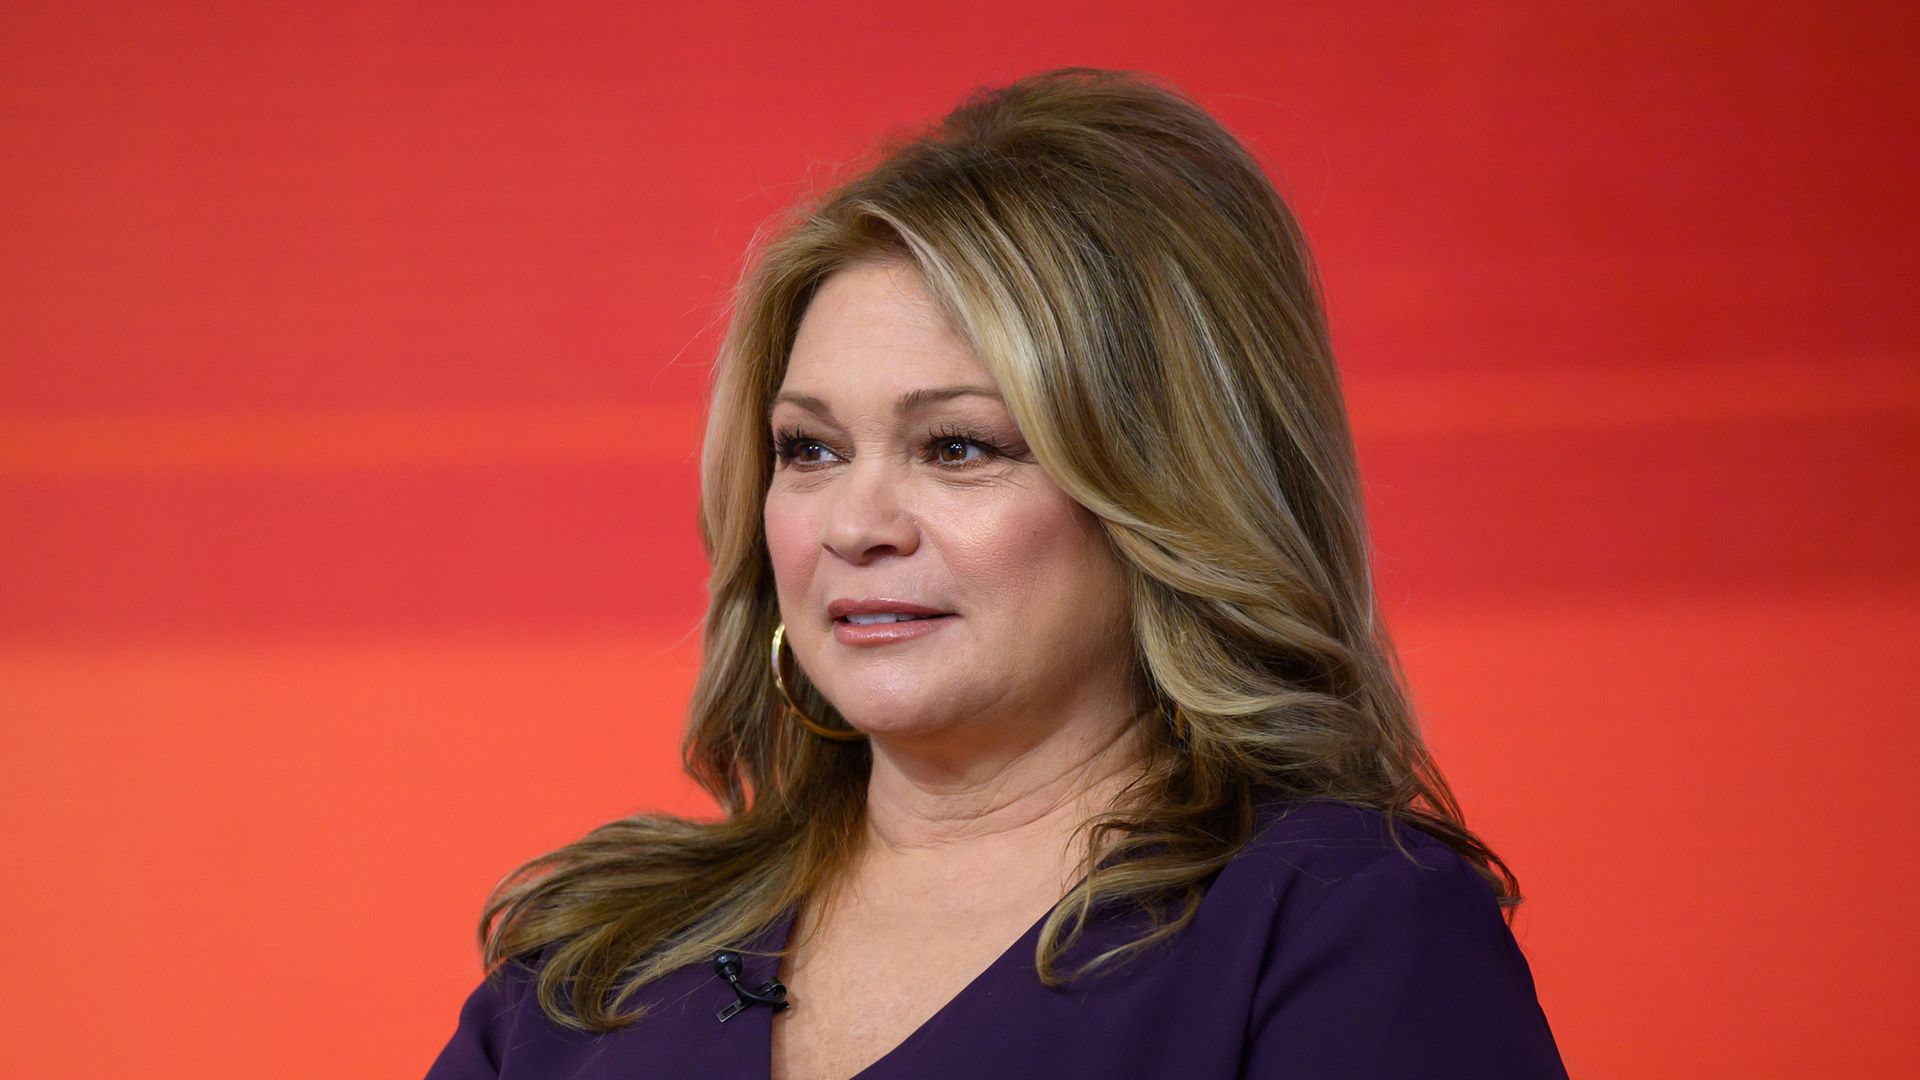 Valerie Bertinelli on Friday, January 24, 2020 on the Today Show